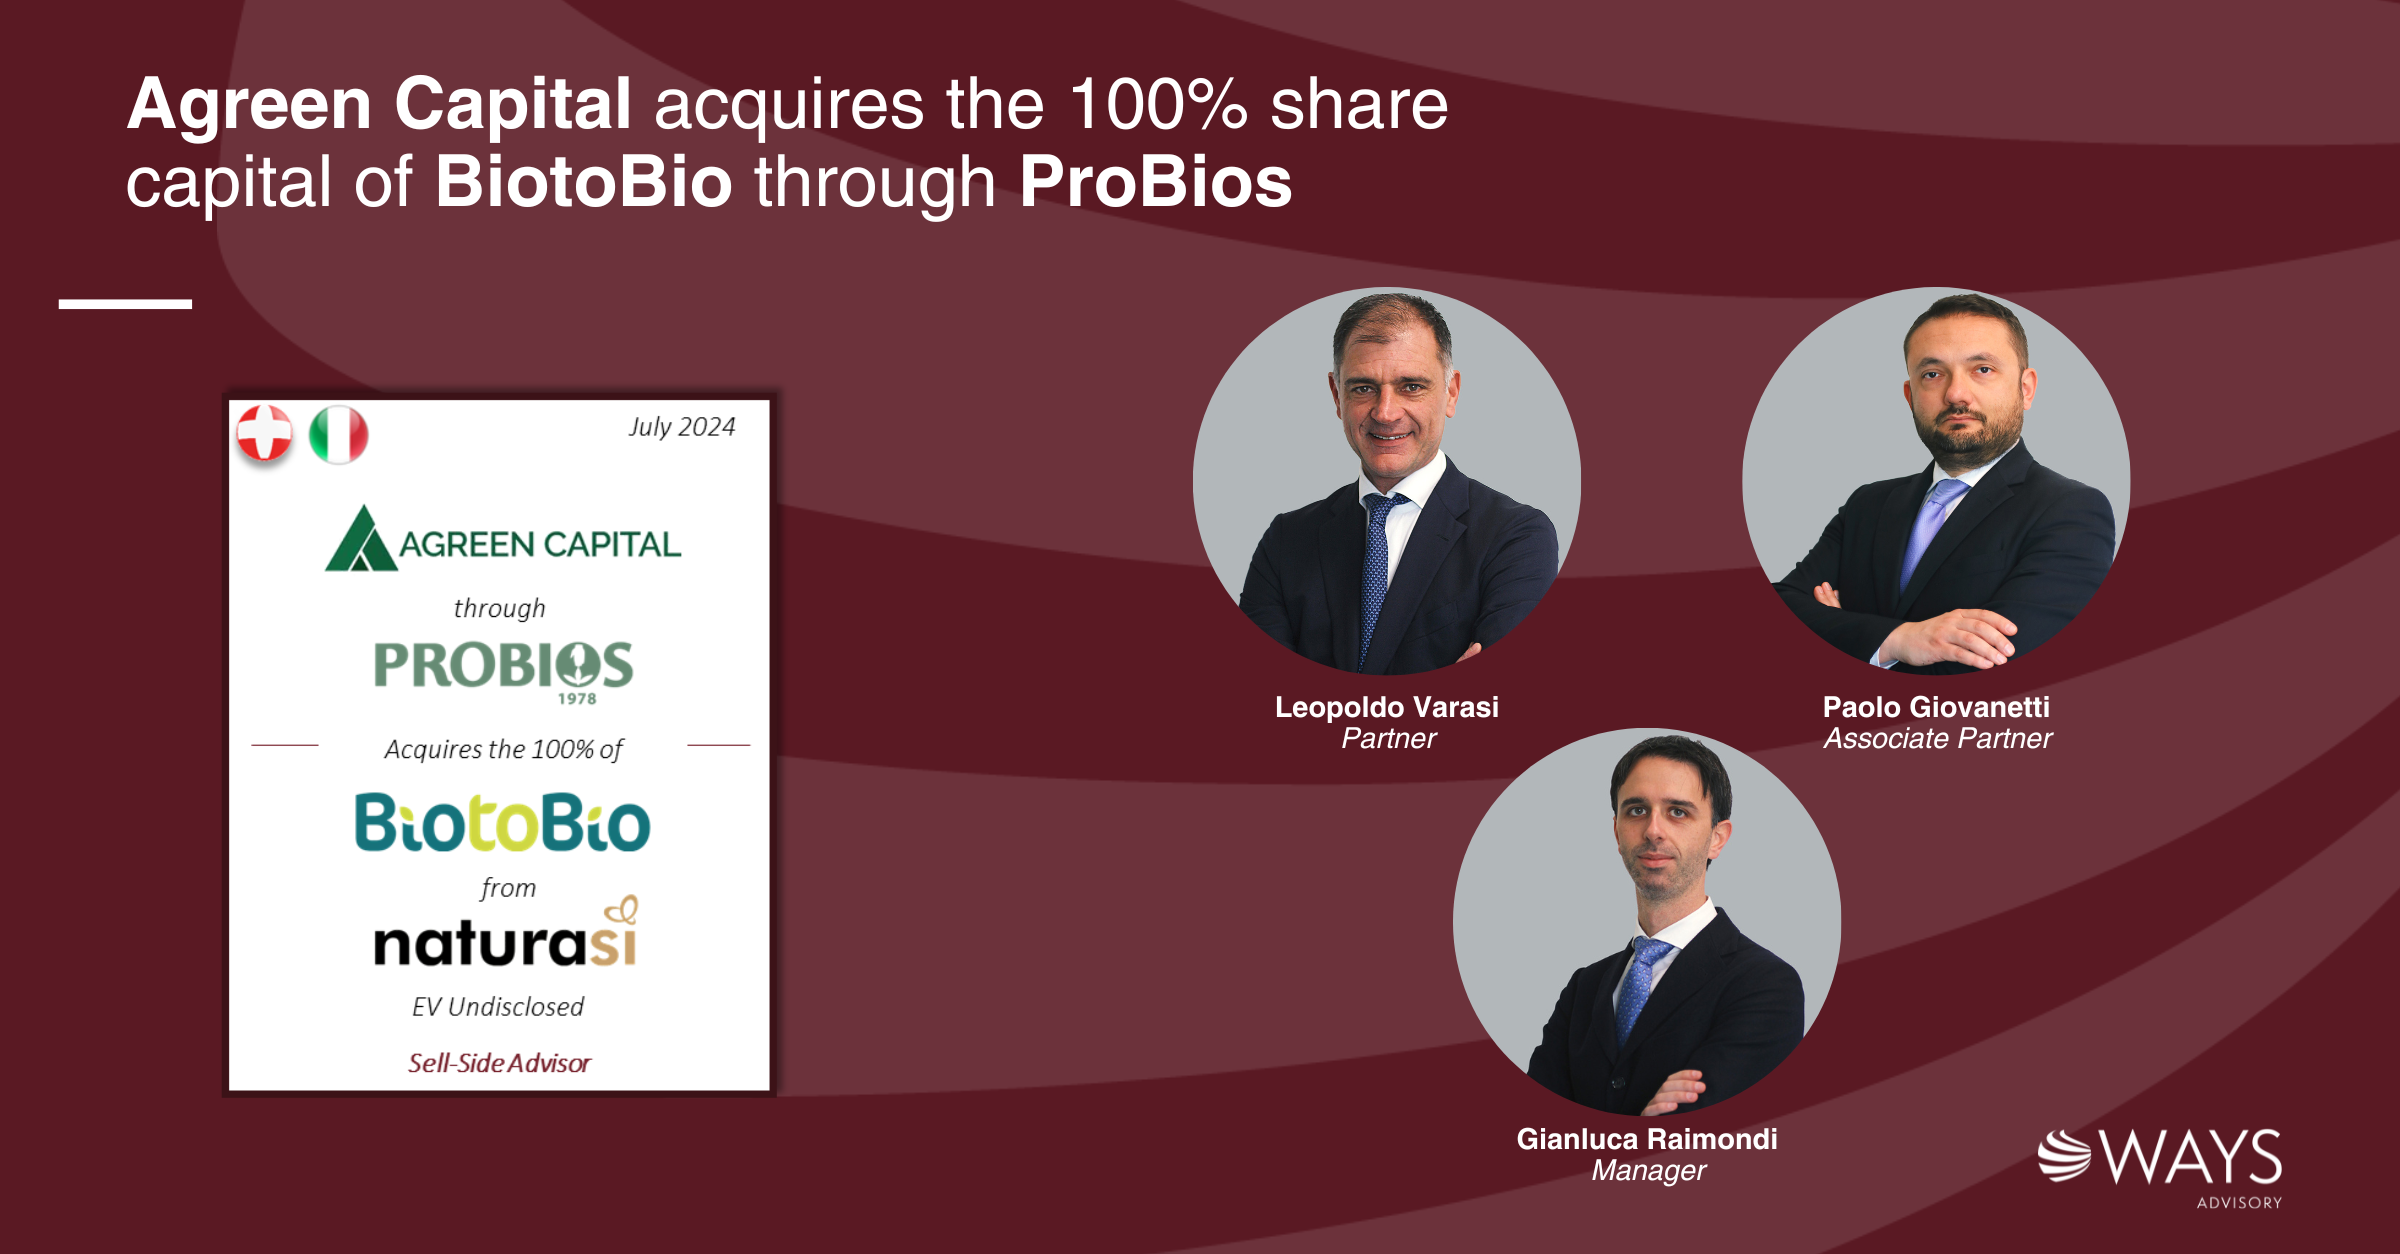 Agreen Capital acquires the 100% share capital of BiotoBio through ProBios